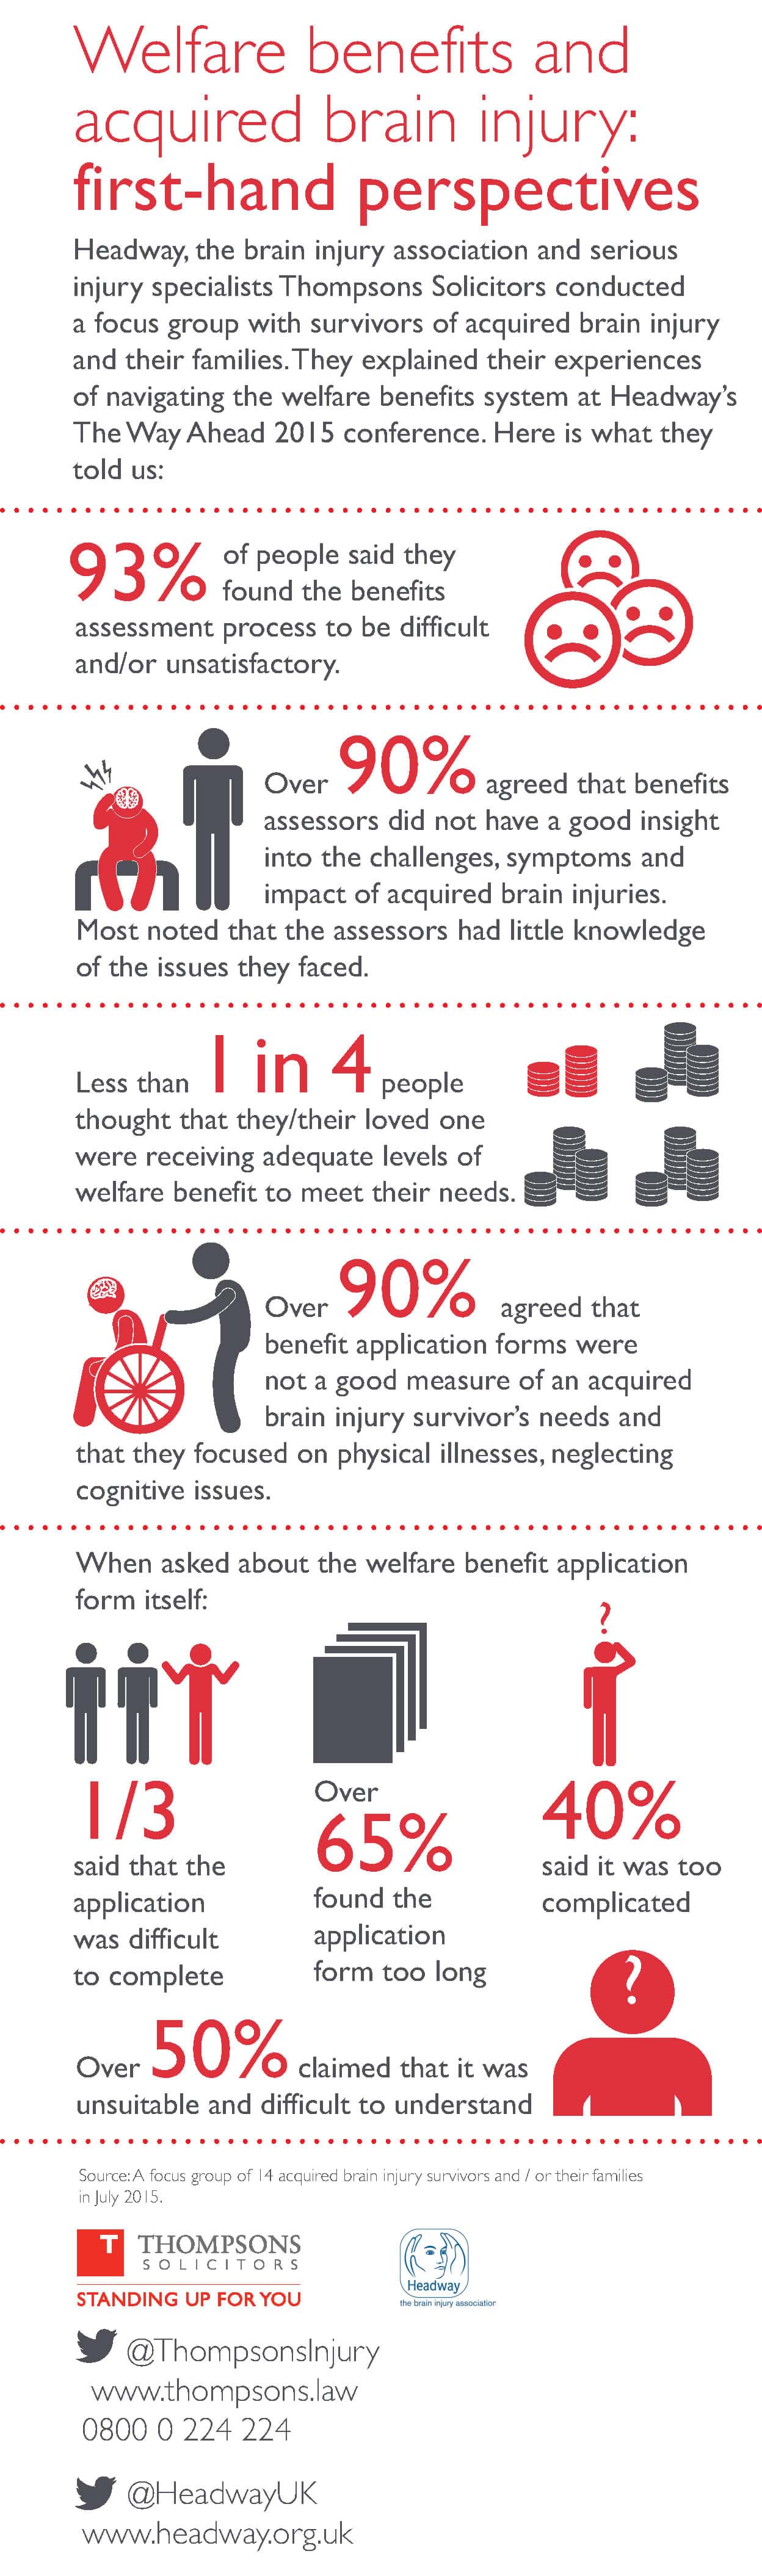 An infographic showing the results of a focus group conducted by Headway and Thompsons Solicitors.